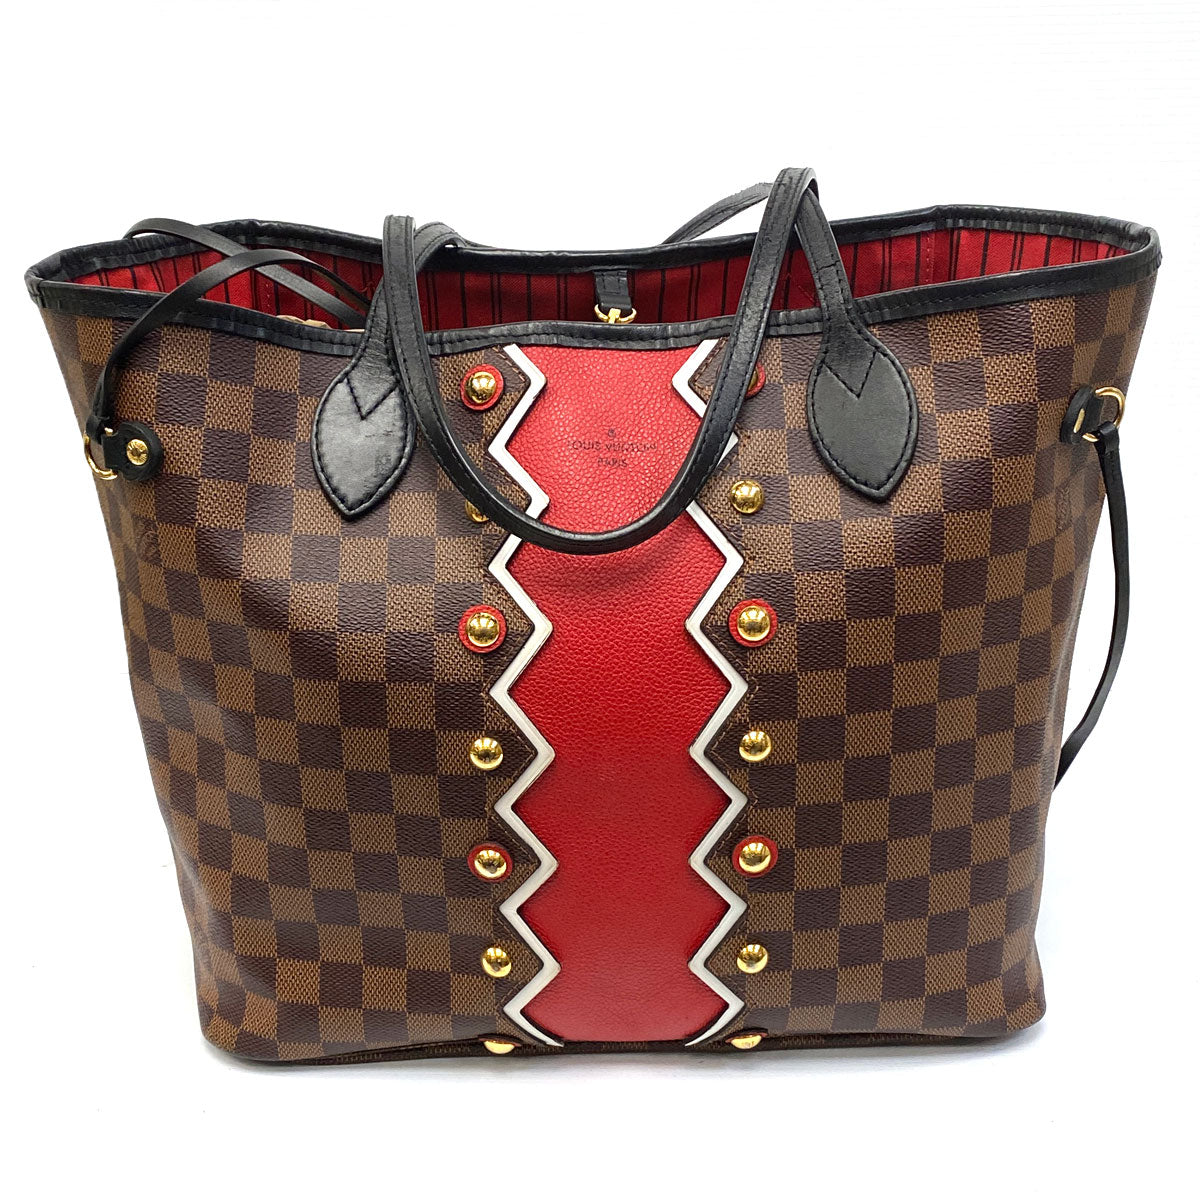 Louis Vuitton Neverfull Limited Edition Stripes Tote bag in brown